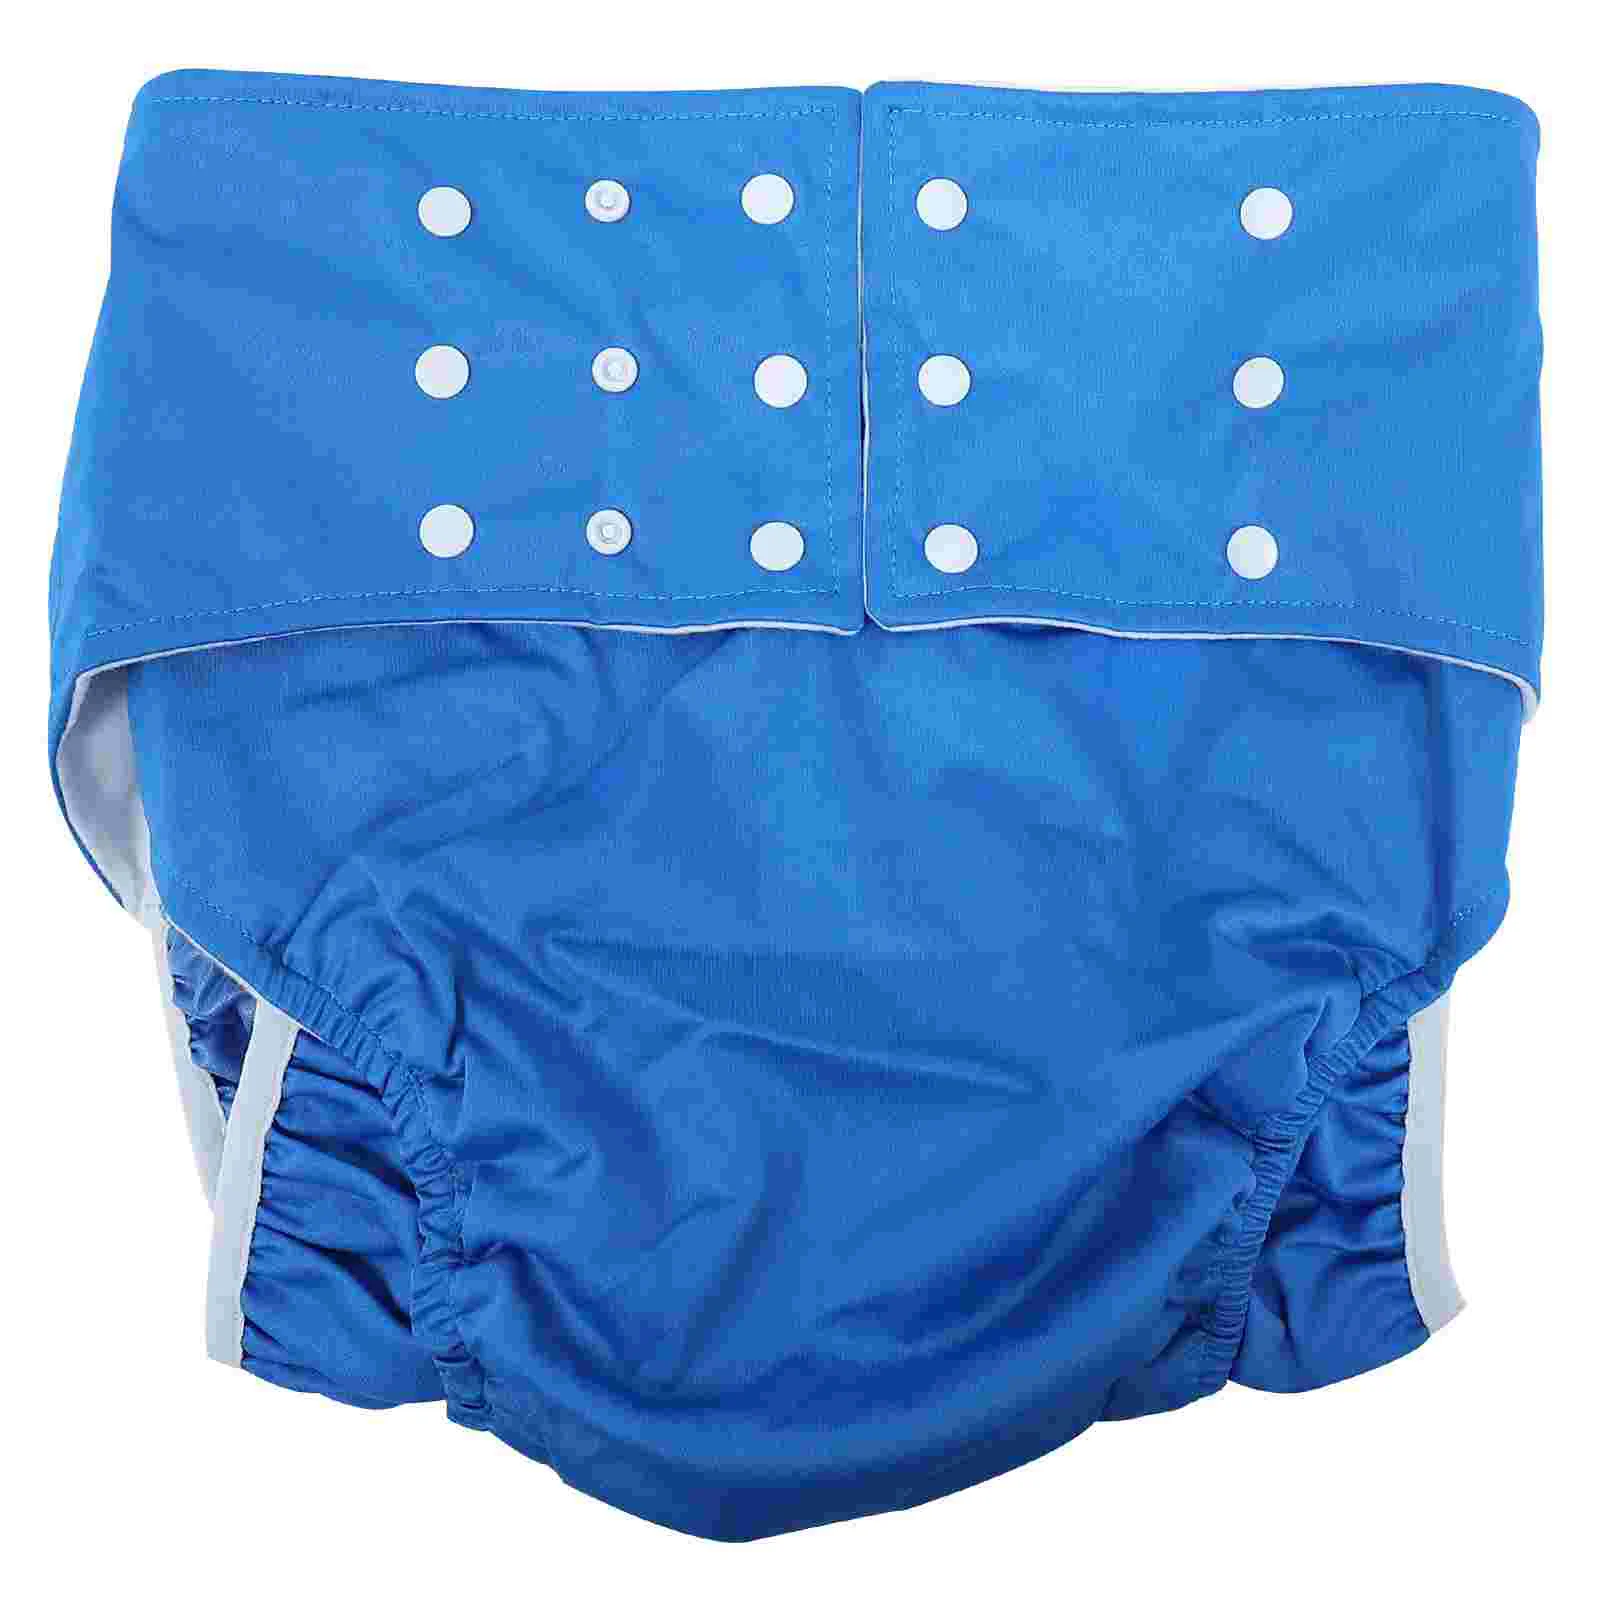 

Diaper Adult Incontinence Old Pants Cloth Man Urinary Washable Adults Nappy Nappies Female Diapers